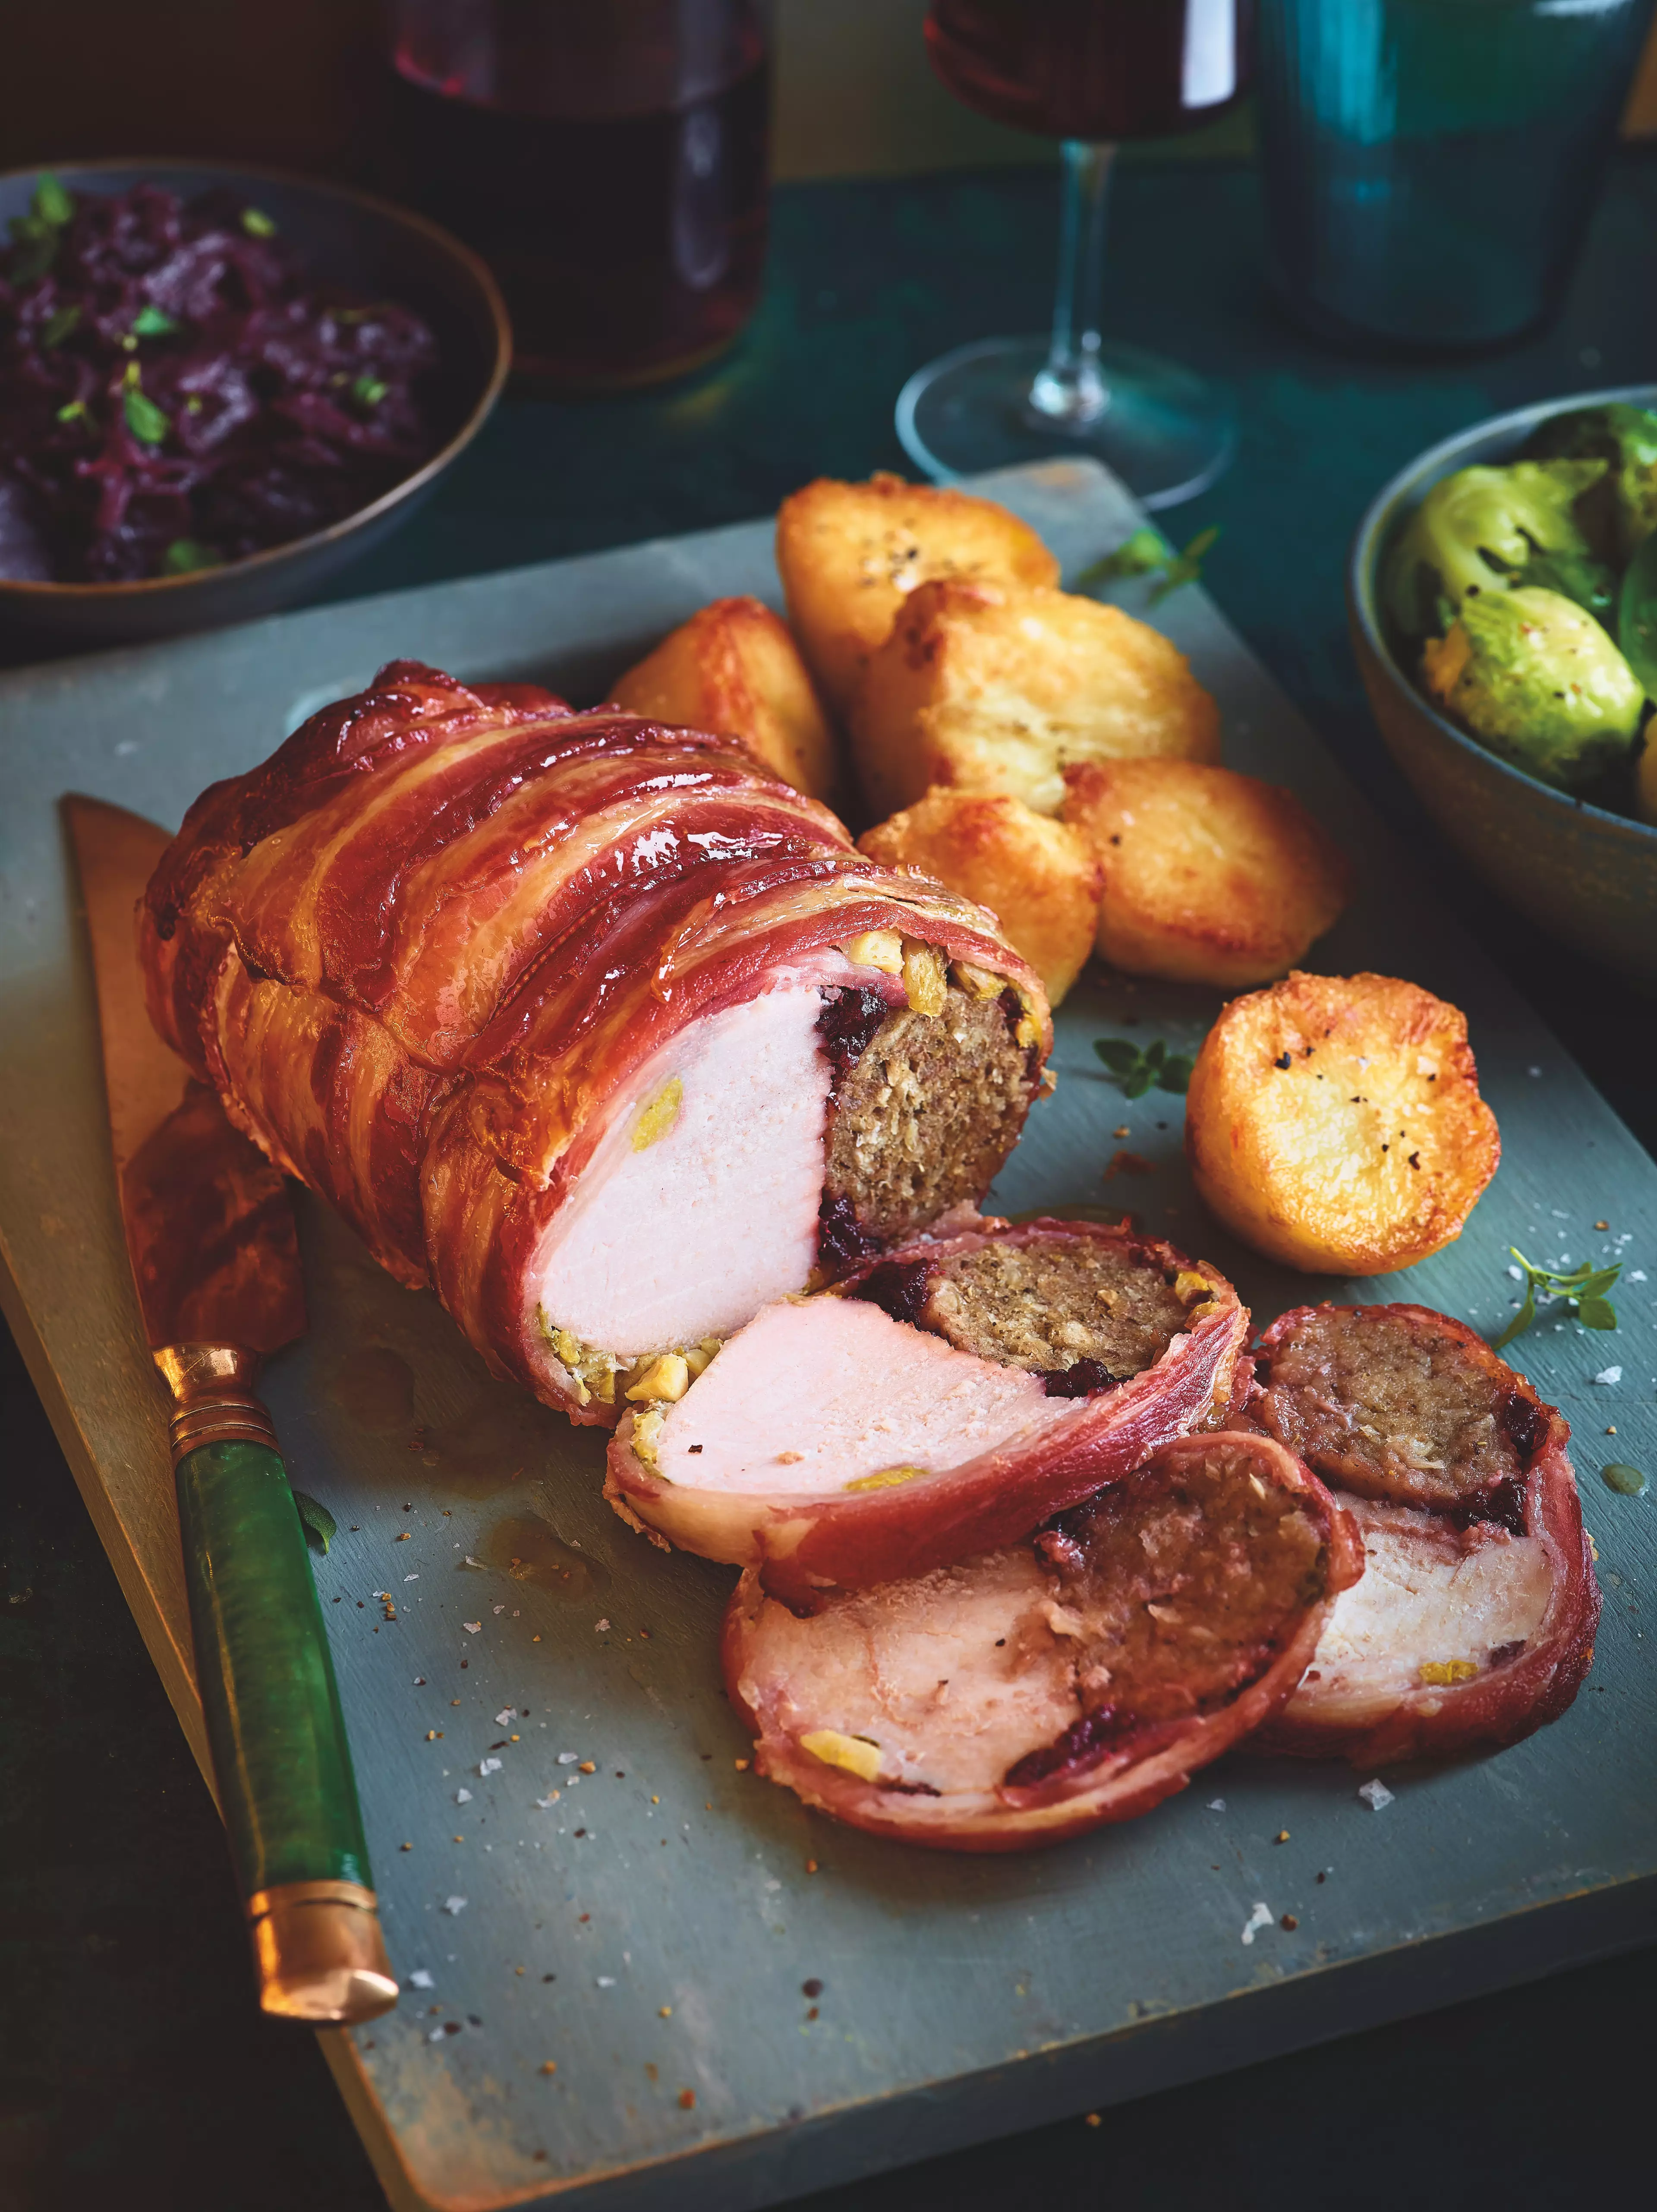 The Festive Feast contains succulent turkey breast, herby stuffing, shredded sprouts and cranberry sauce (